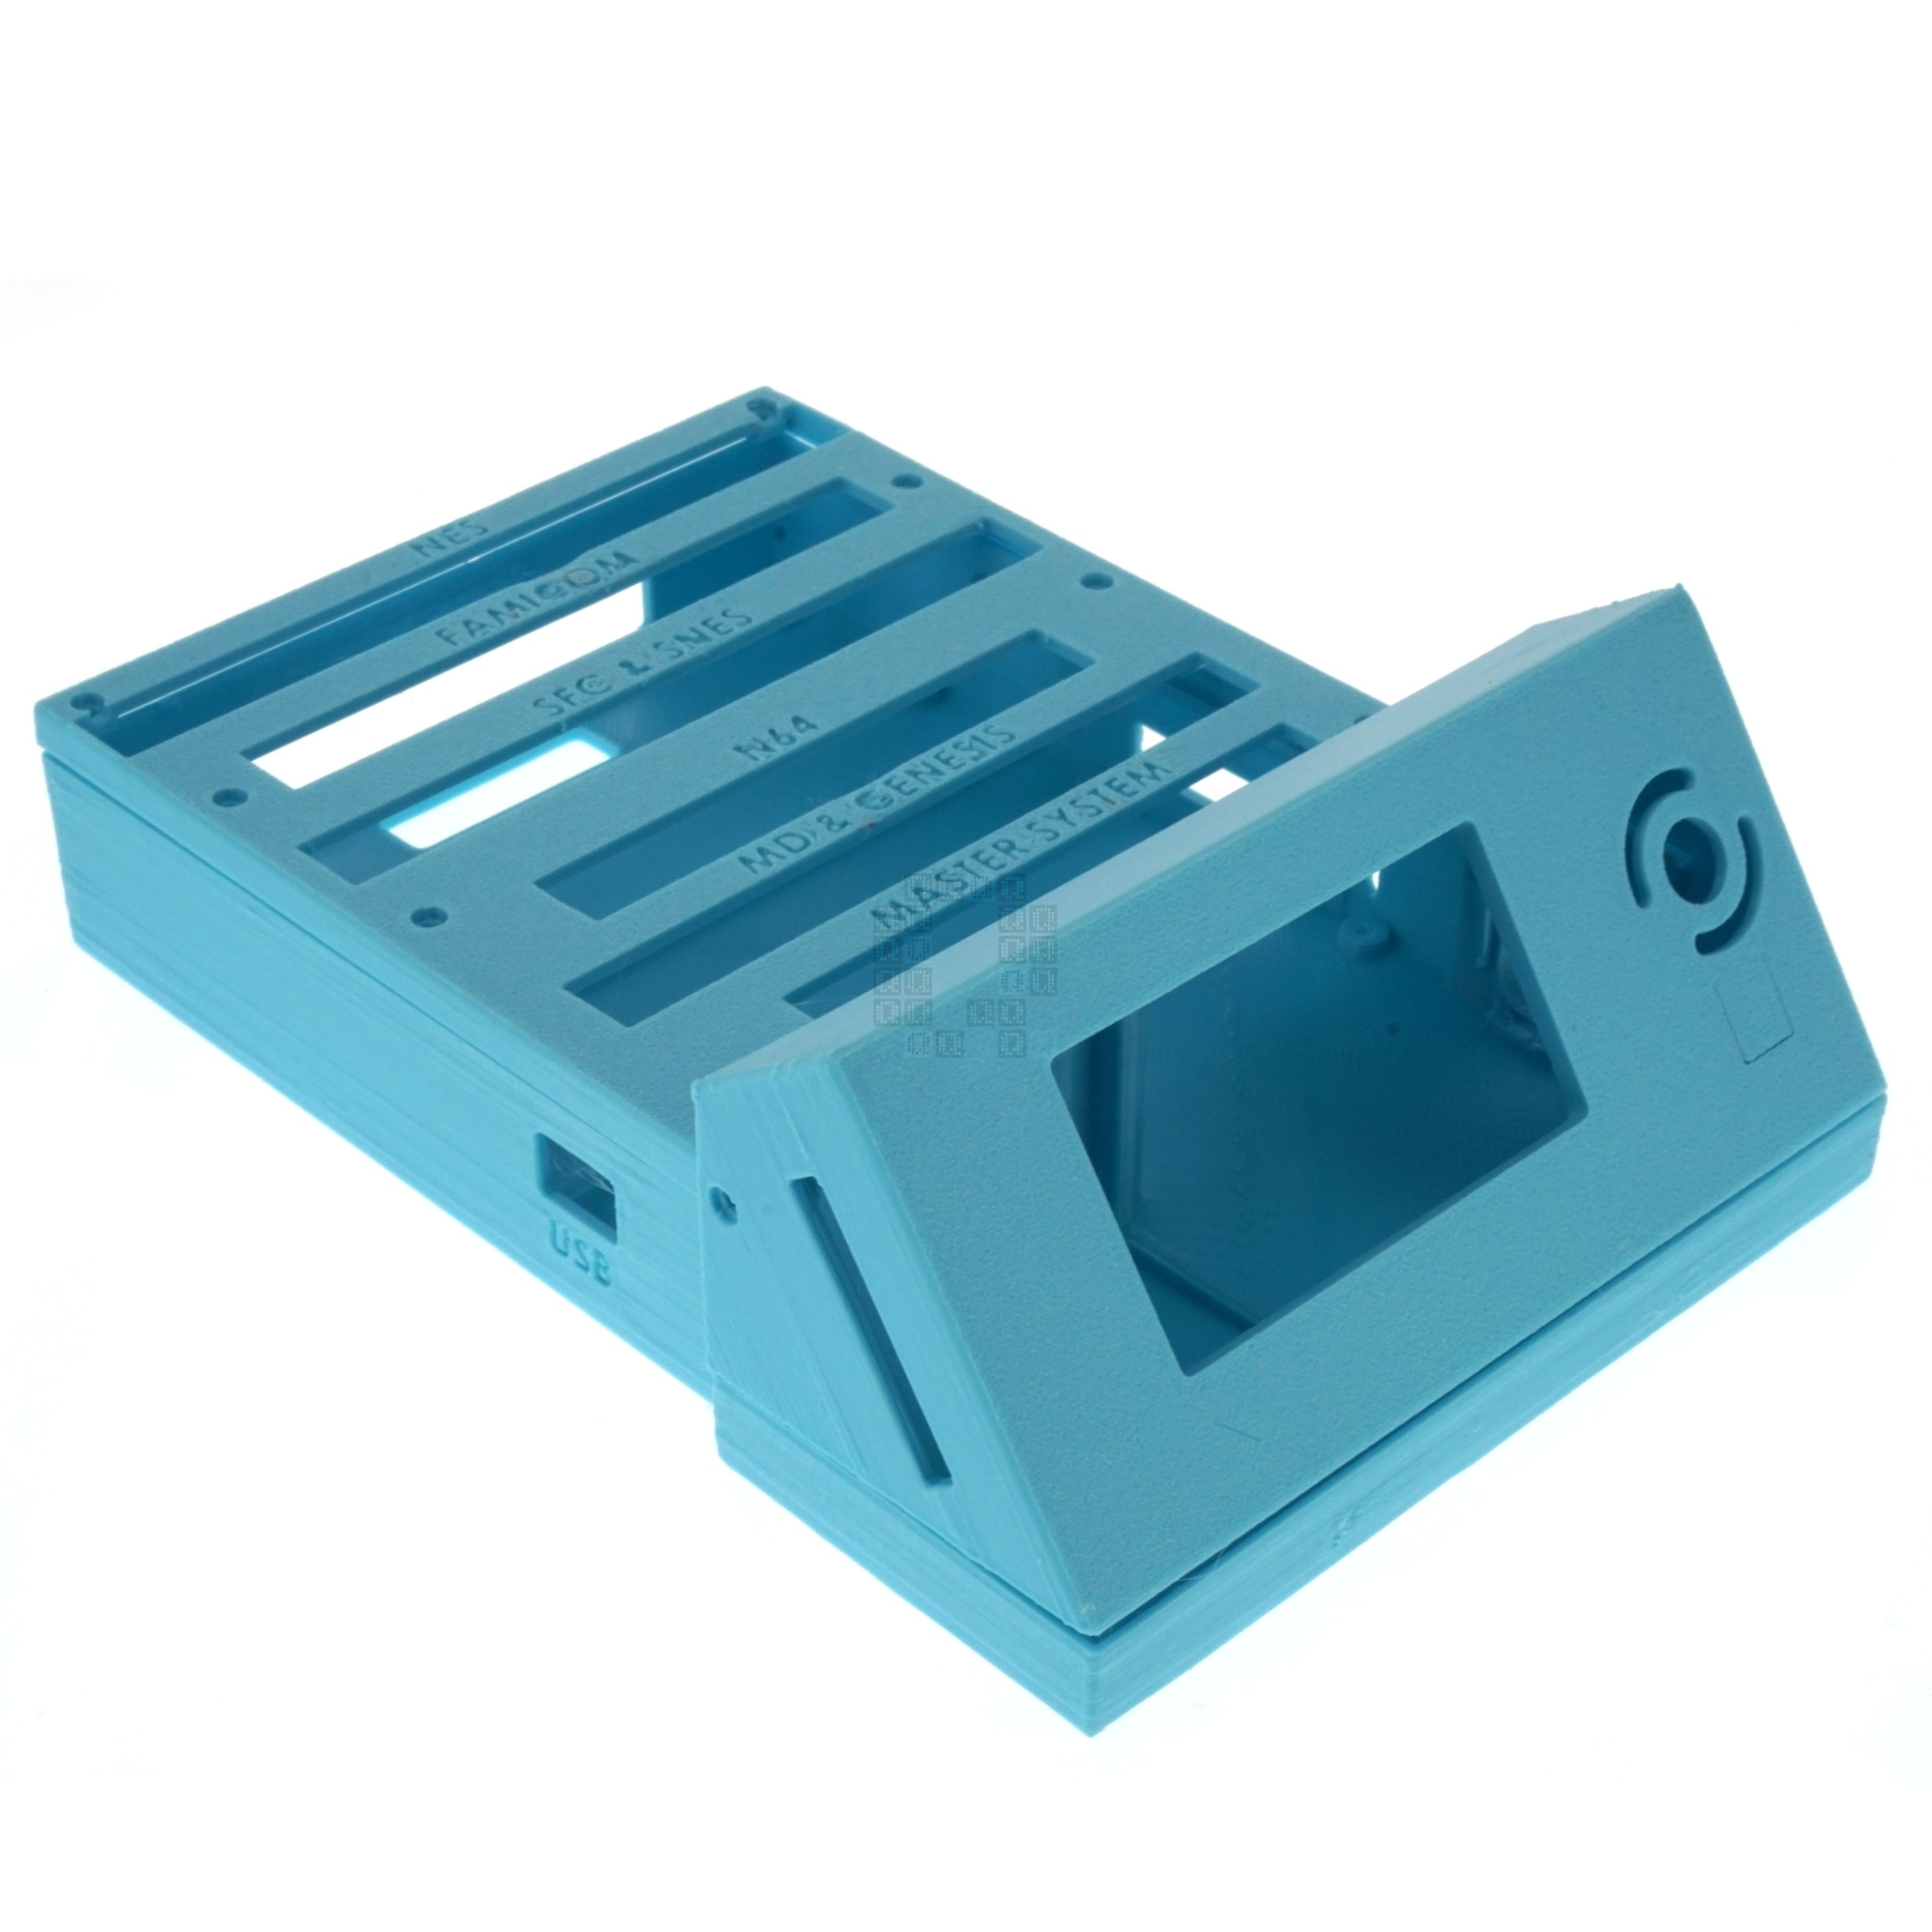 Sanni Open Source Cart Reader HW5 Fully Enclosed Shell Housing, Blue